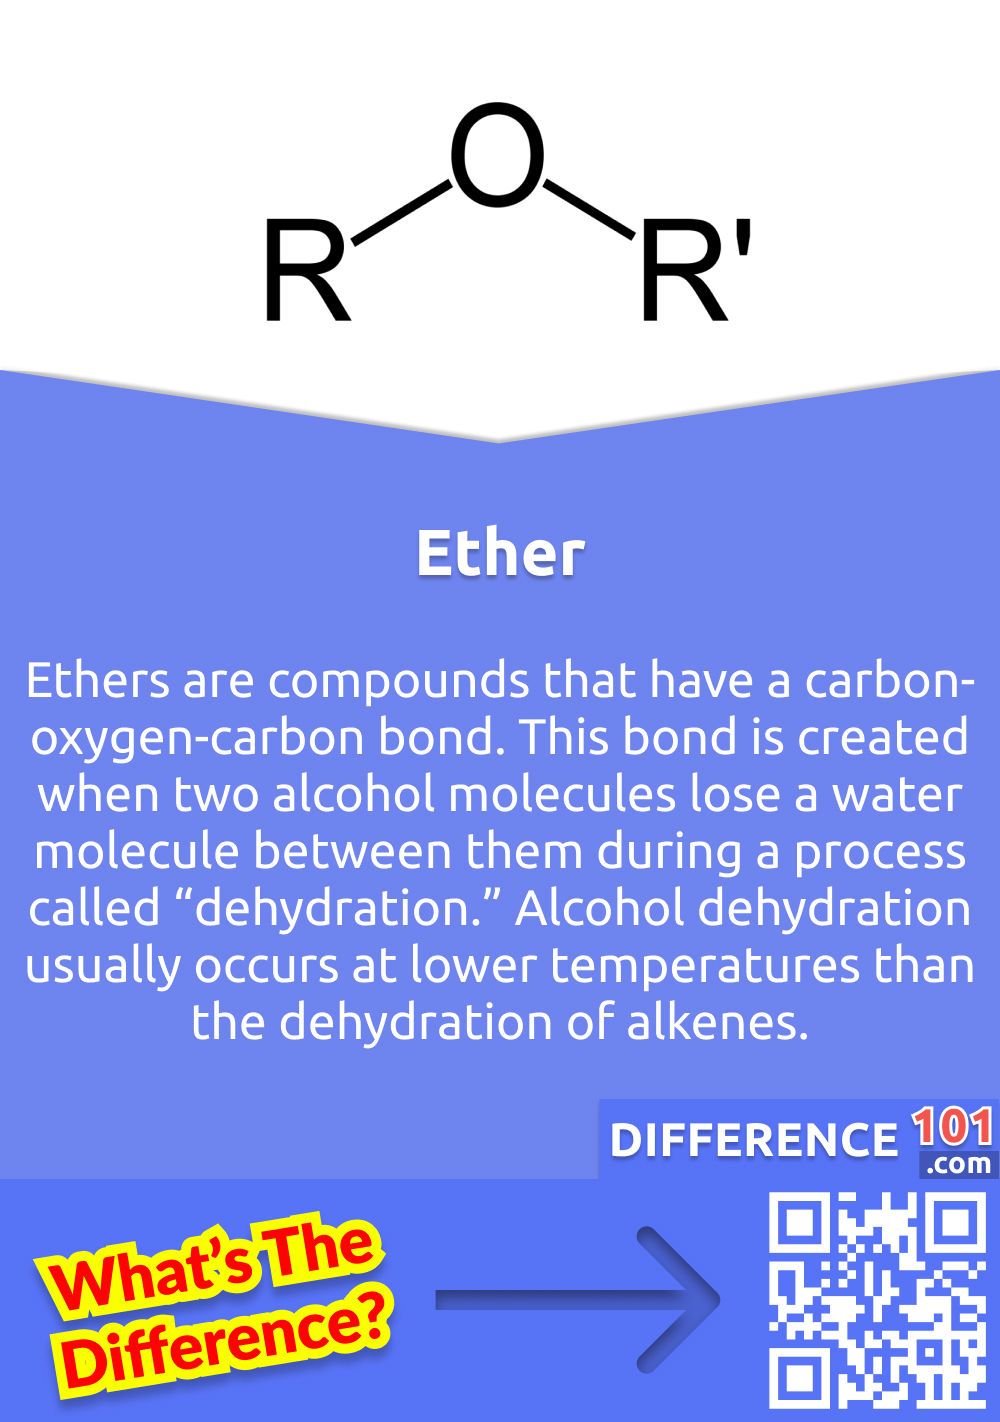 What Is Ether? Ethers are compounds that have a carbon-oxygen-carbon bond. This bond is created when two alcohol molecules lose a water molecule between them during a process called “dehydration.” Alcohol dehydration usually occurs at lower temperatures than the dehydration of alkenes.